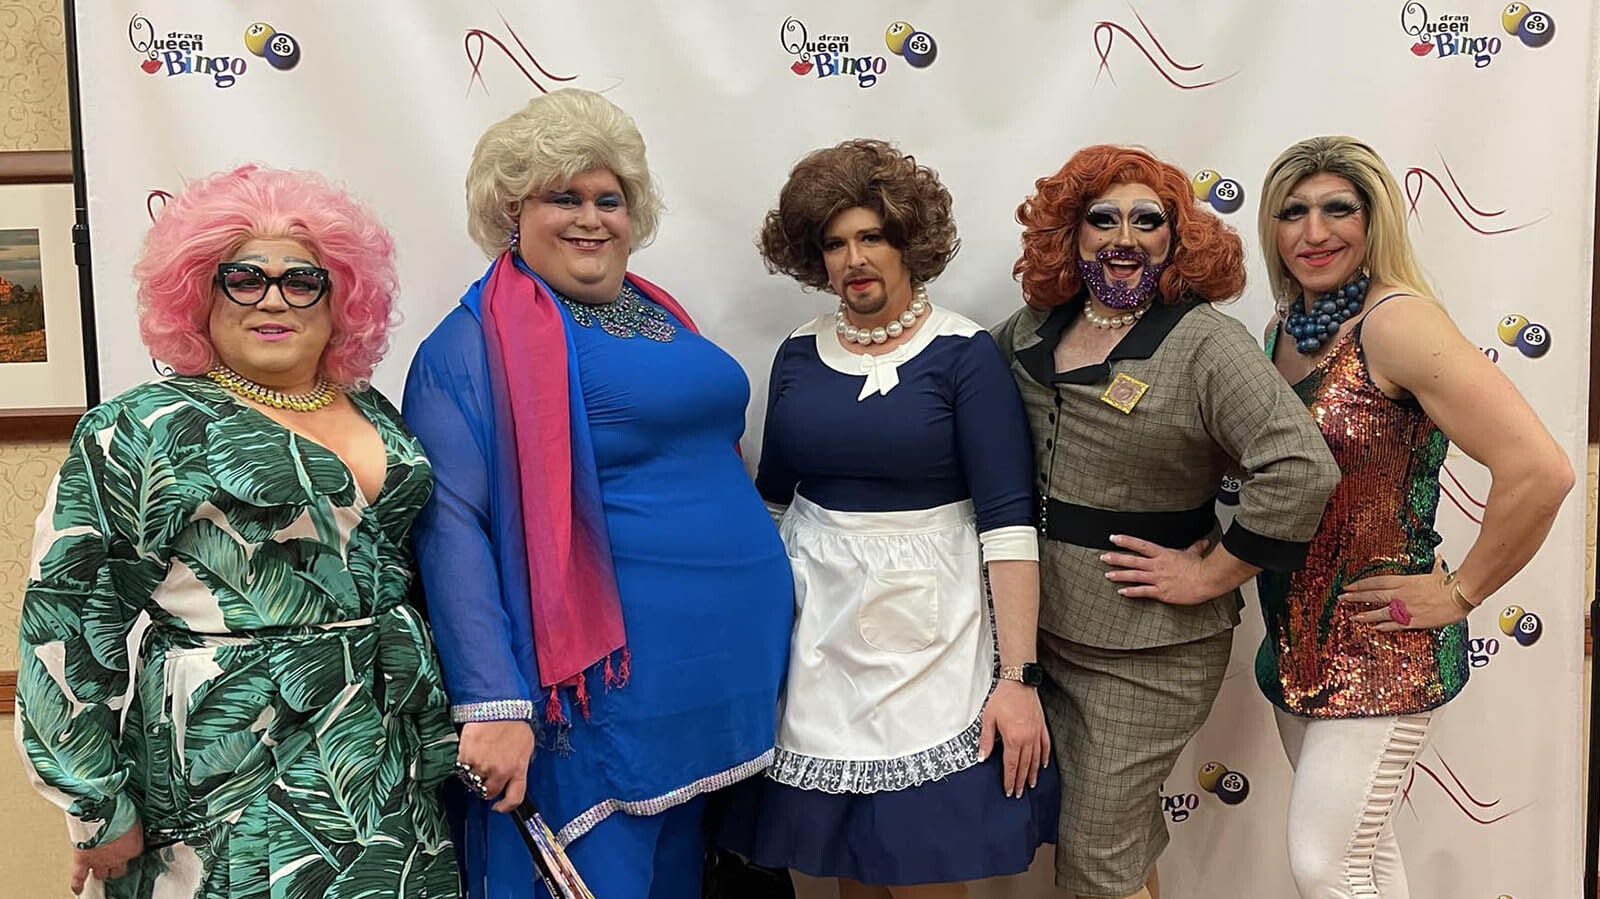 The Stilettos is a Laramie, Wyoming-based drag queen group that helps put on the annual Drag Queen Bingo event.